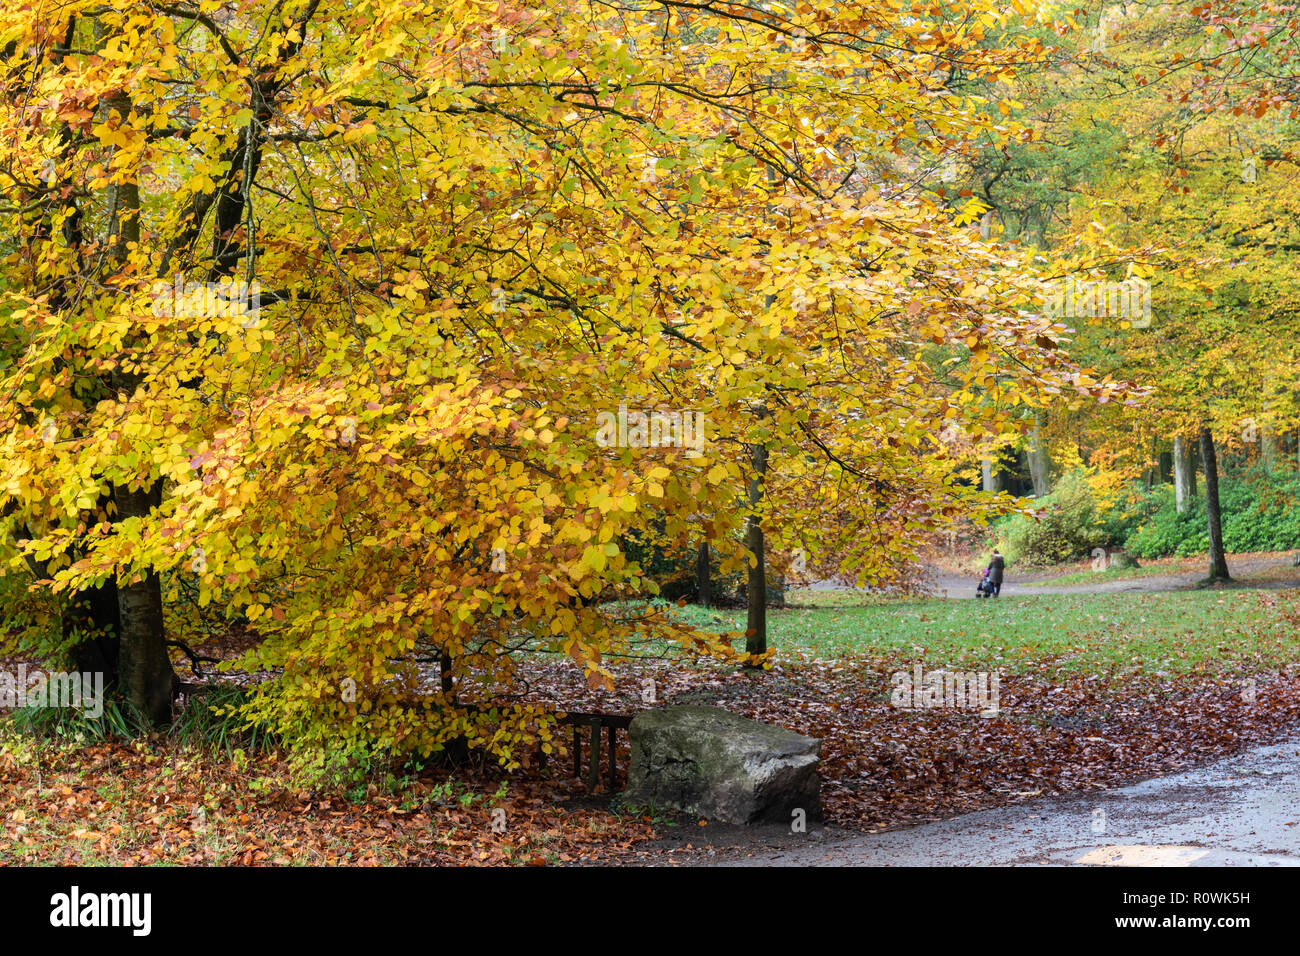 Shearwater forest on The Longleat Estate in autumn, Wiltshire, England, UK Stock Photo